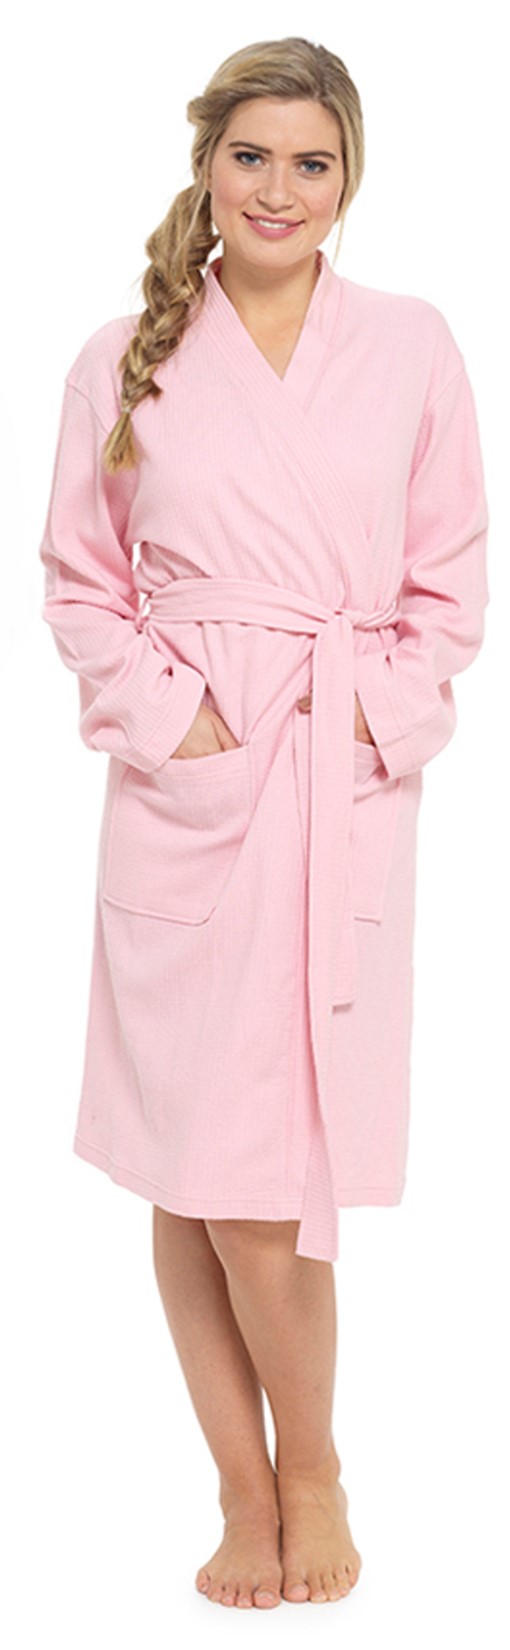 Ladies Waffle Dressing Gown Pink LN560A.jpg  by Thingimijigs